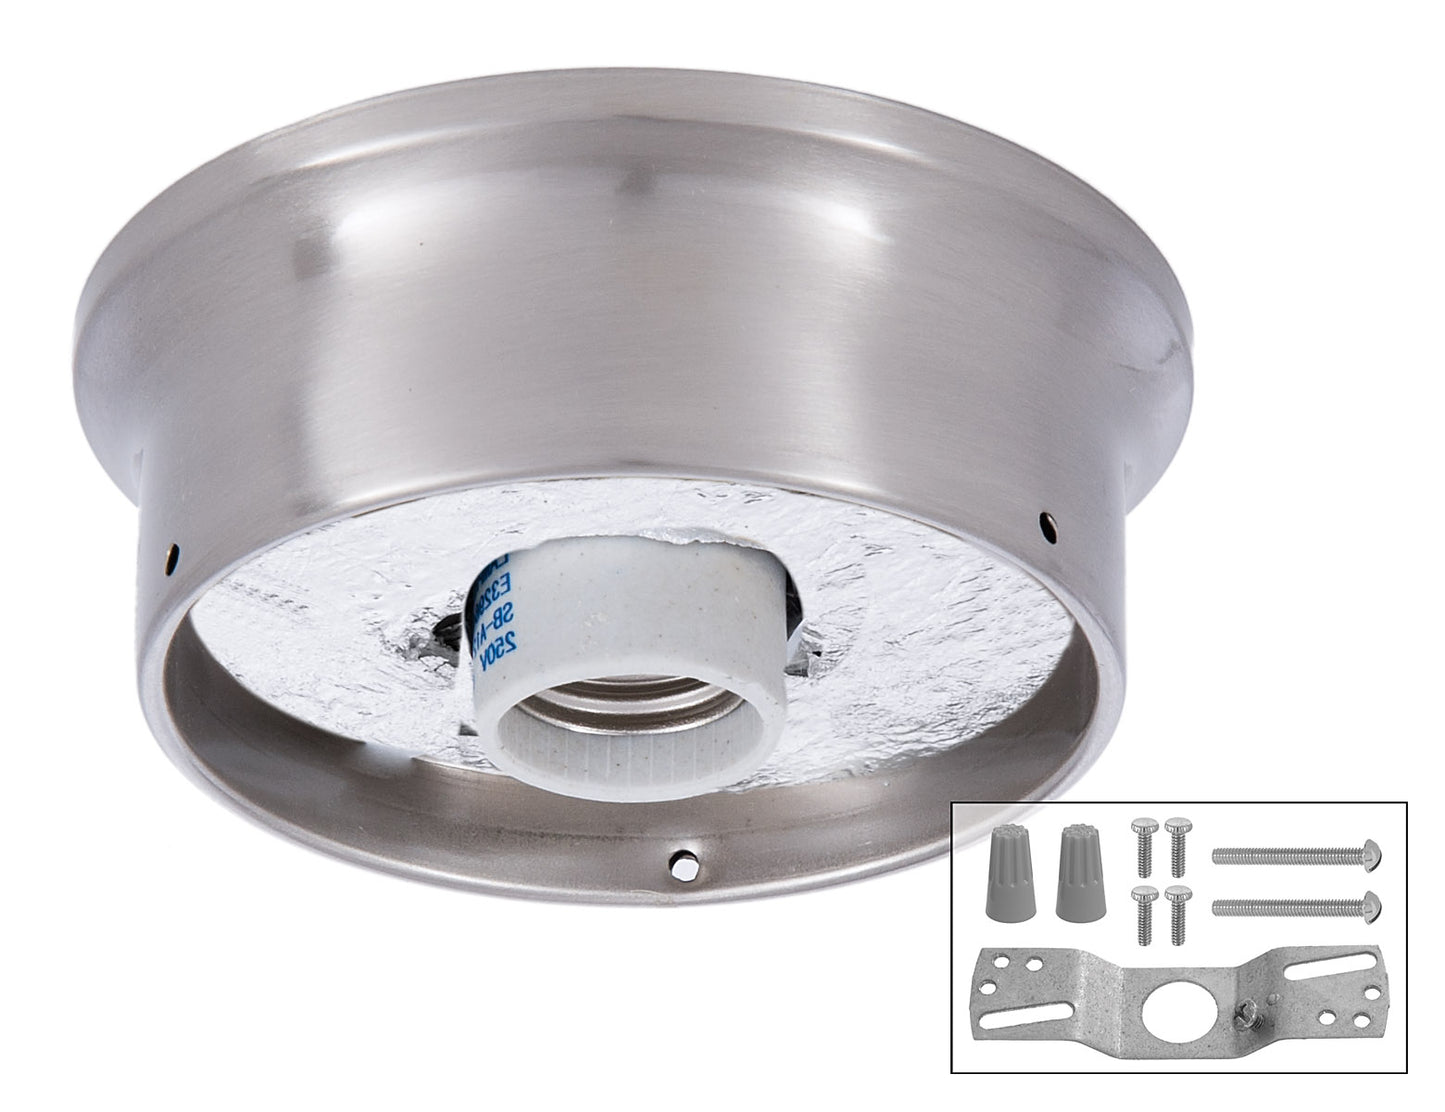 4 Inch Fitter Wired Flush Mount Ceiling Fixture in Satin Nickel Finish